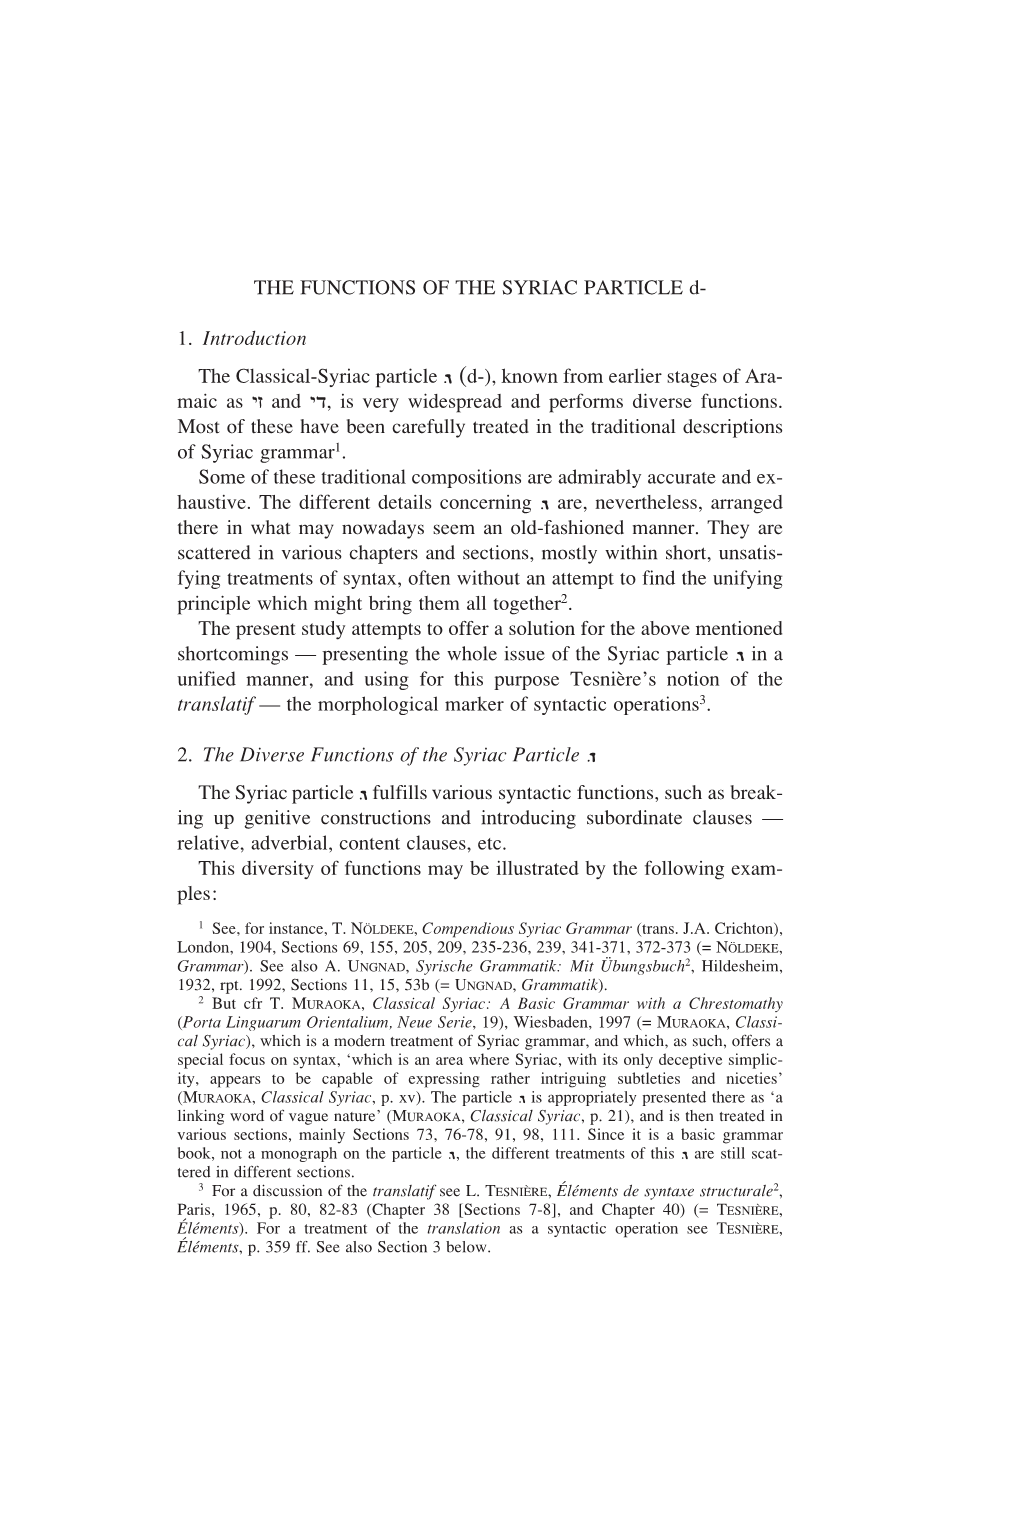 THE FUNCTIONS of the SYRIAC PARTICLE D